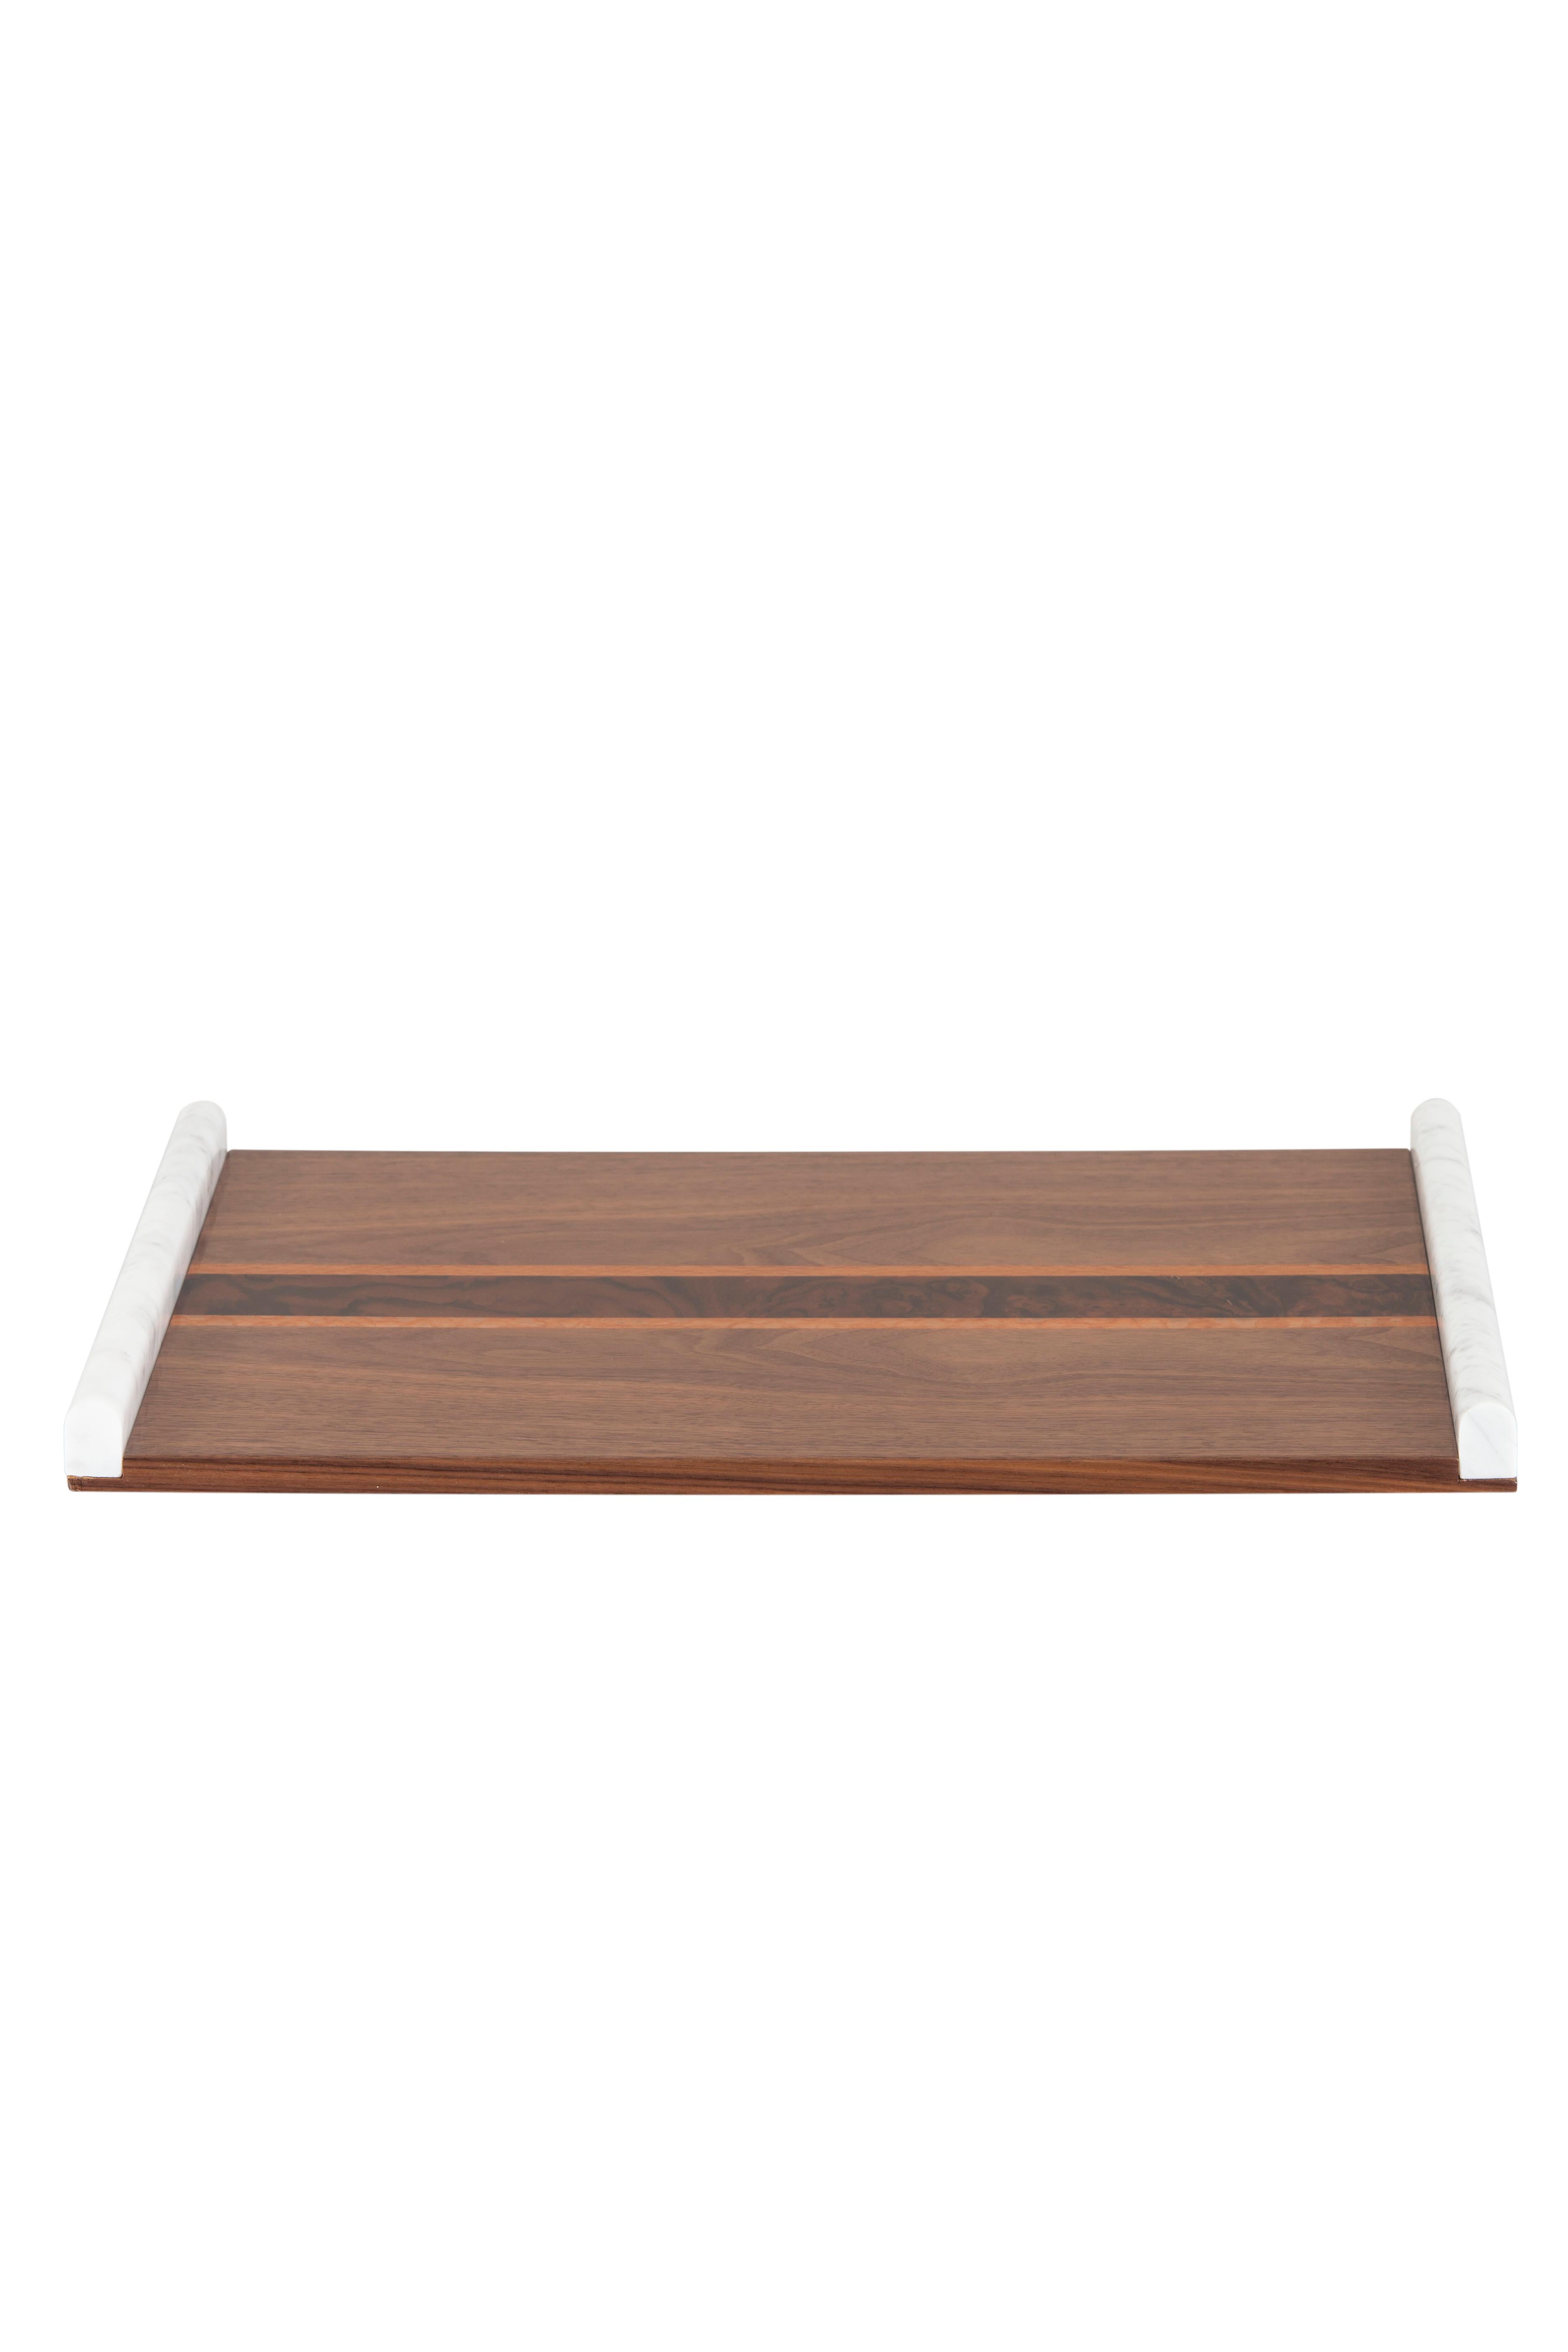 Guadiana serving tray, Lusitanus Home Collection, Handcrafted in Portugal - Europe by Lusitanus Home.

Guadiana is a sublime serving tray, designed to uplift layback moments. Handcrafted with precision and care, the wooden matches seamlessly with